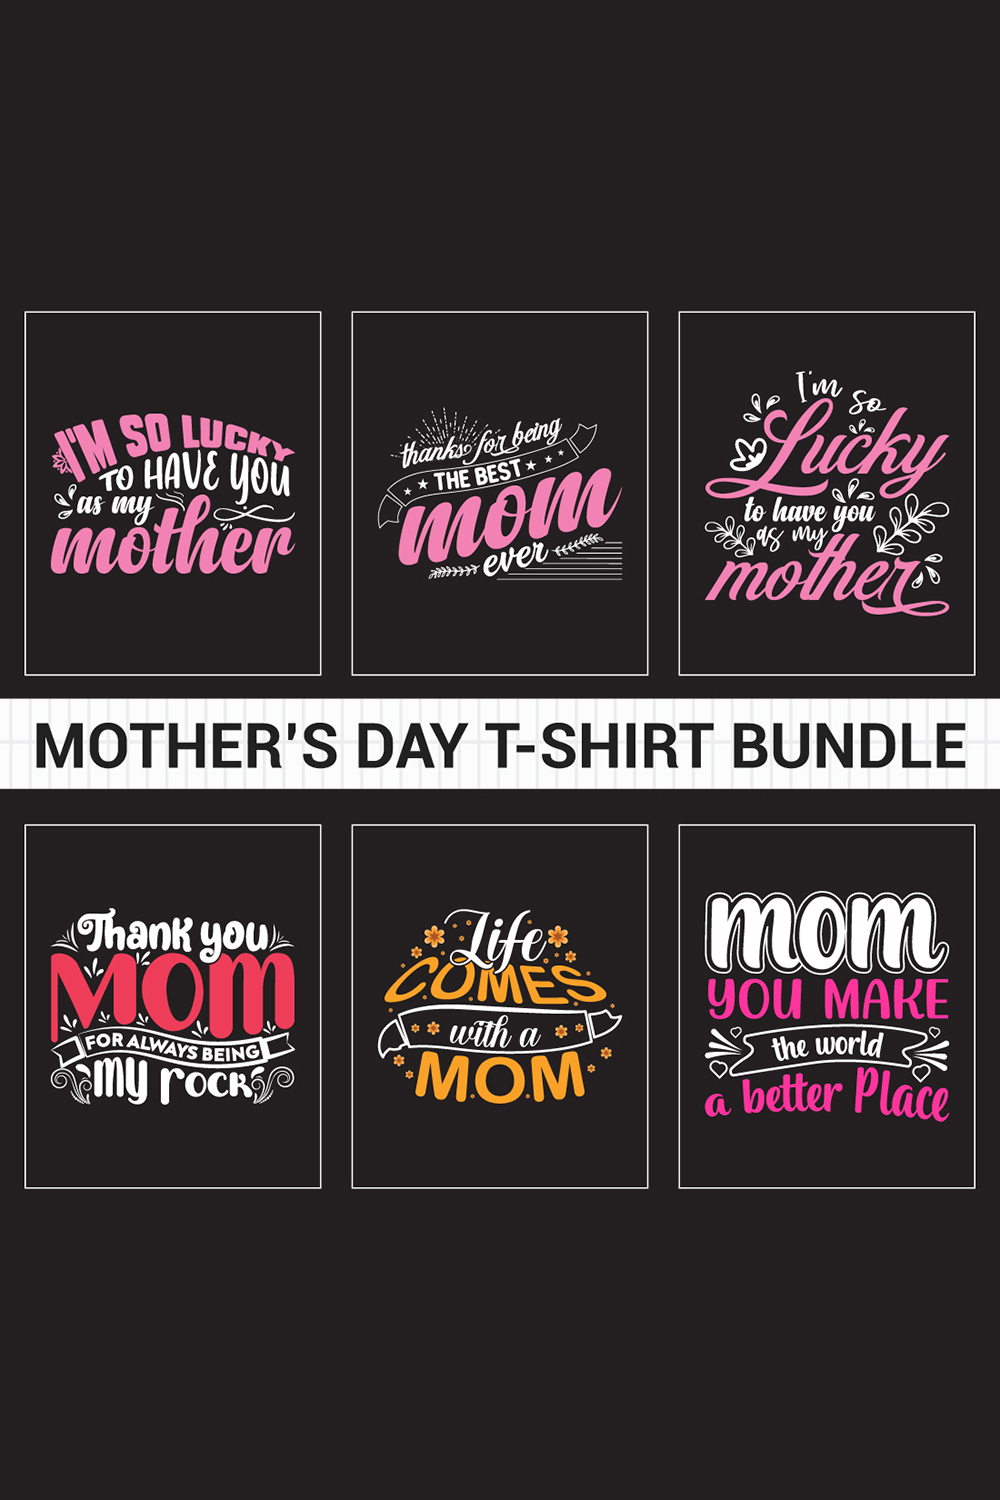 Mommy's MCM SVG Cutting File Ai Dxf and Printable PNG 